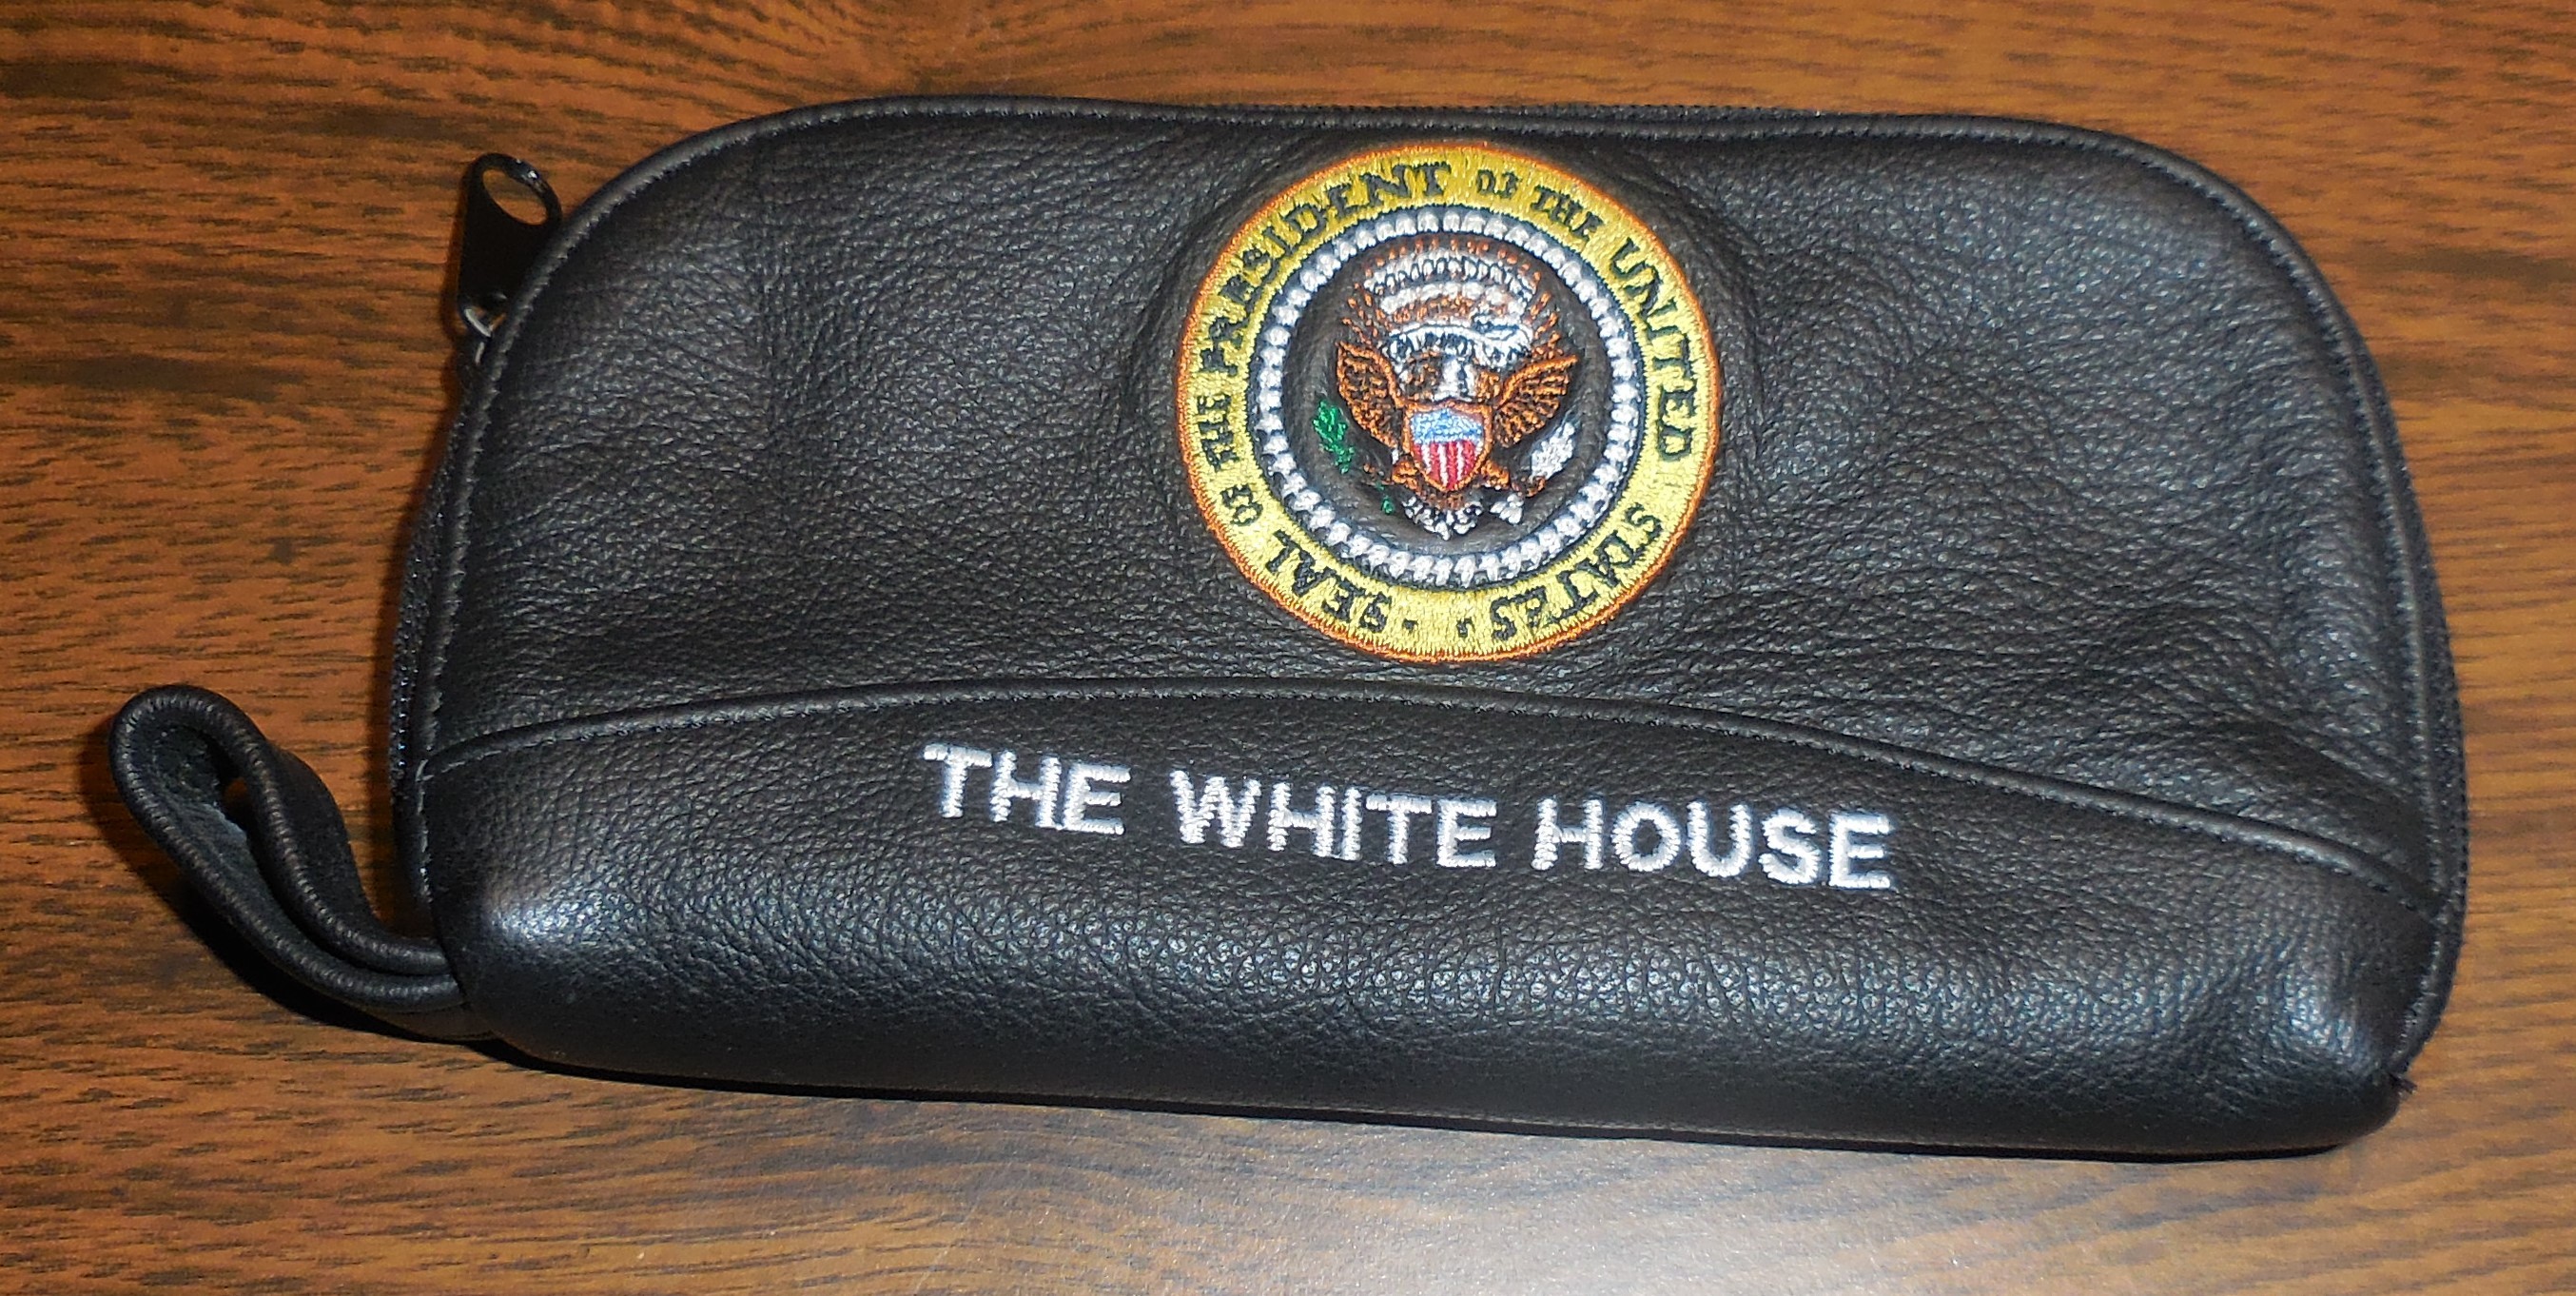 2708x1362 This leather Bag in embroidered with a full color Presidential Seal and the  words “The White House” Brown or Black $100.00 each